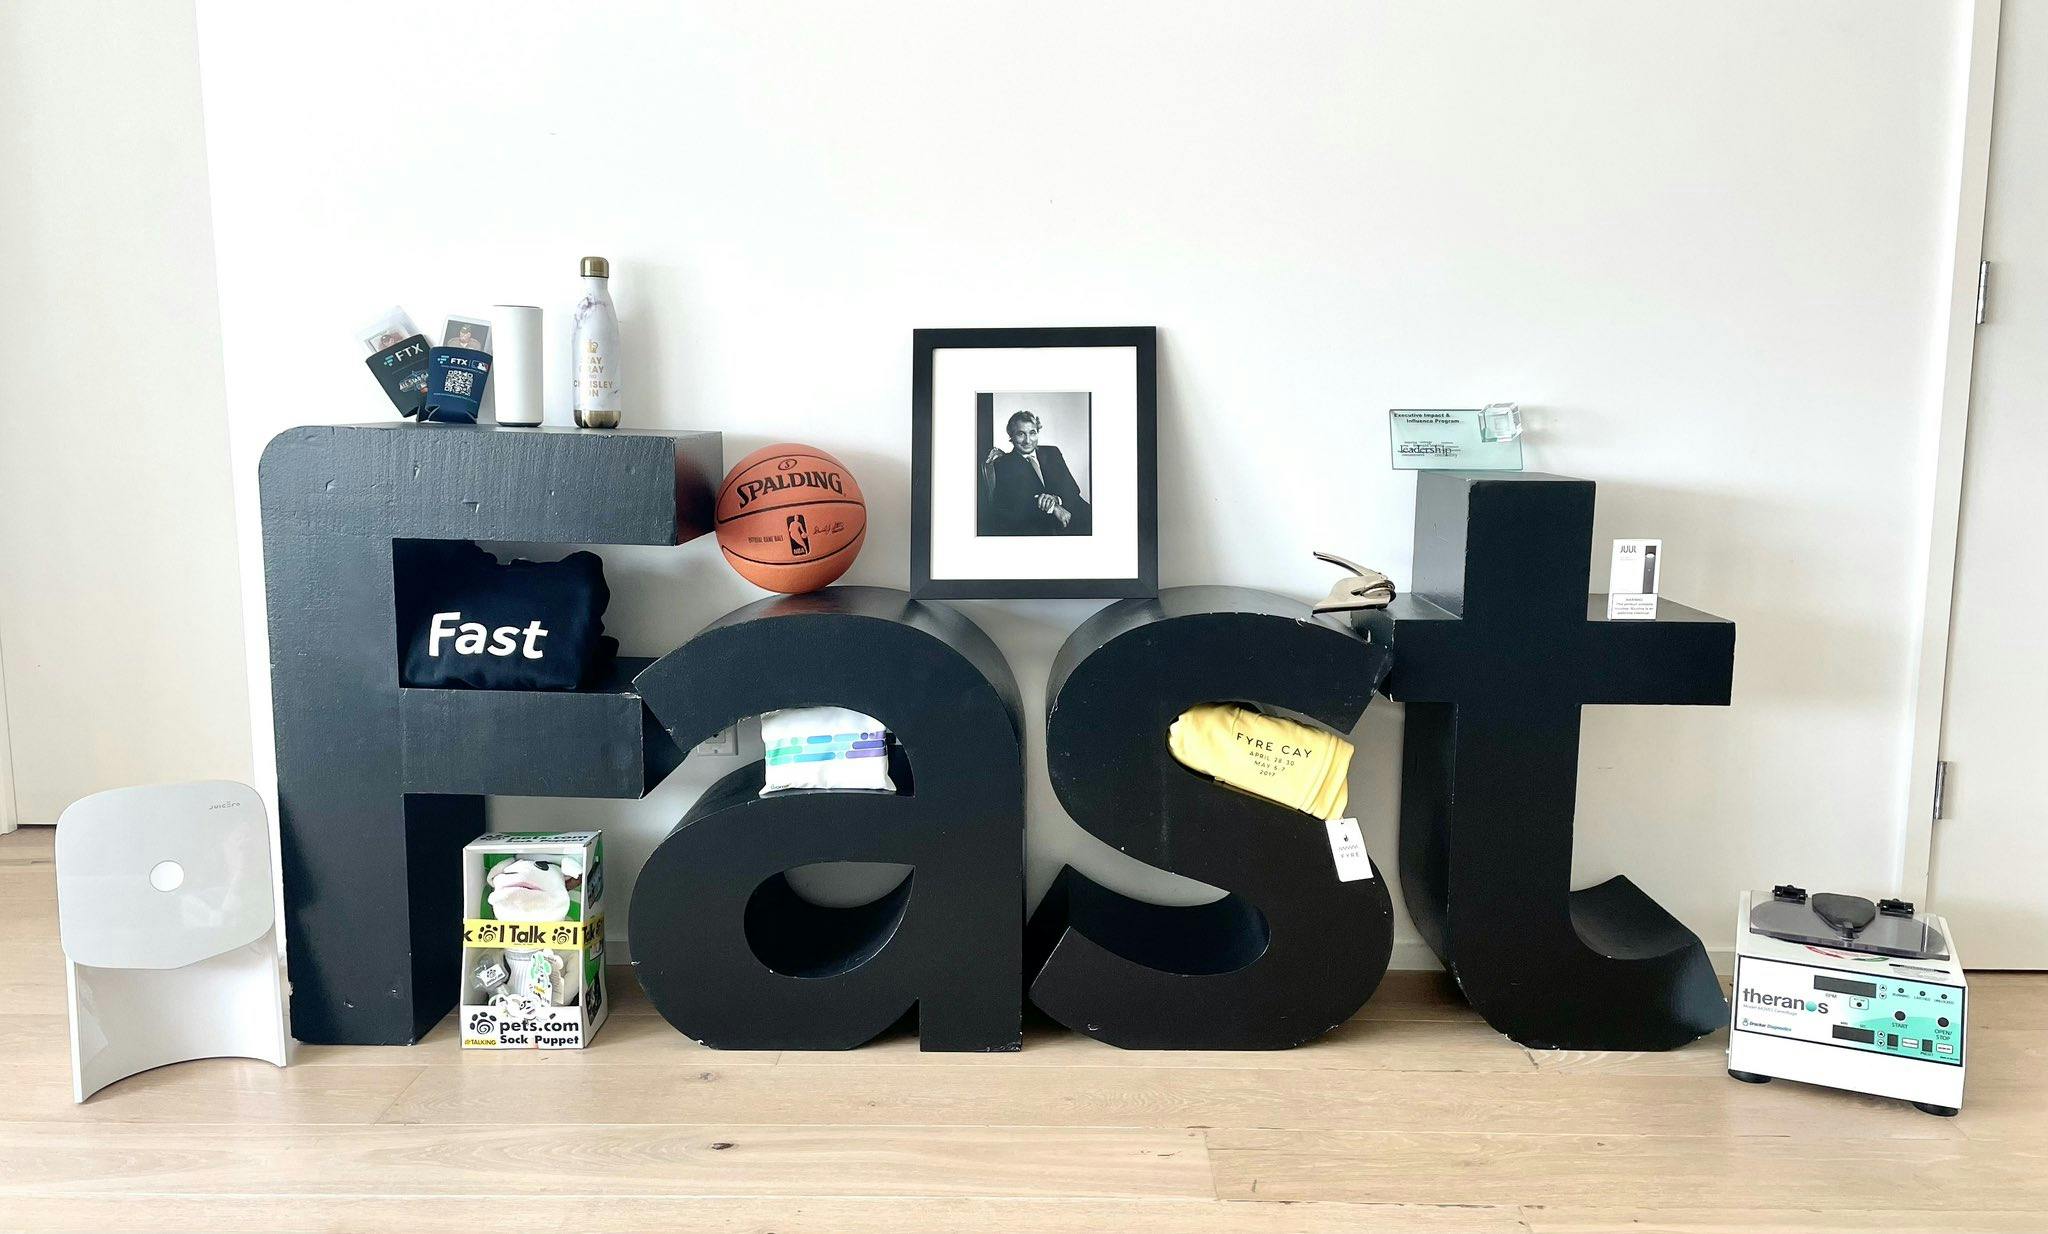 A photograph of several items in the collection arranged around large FAST letters.